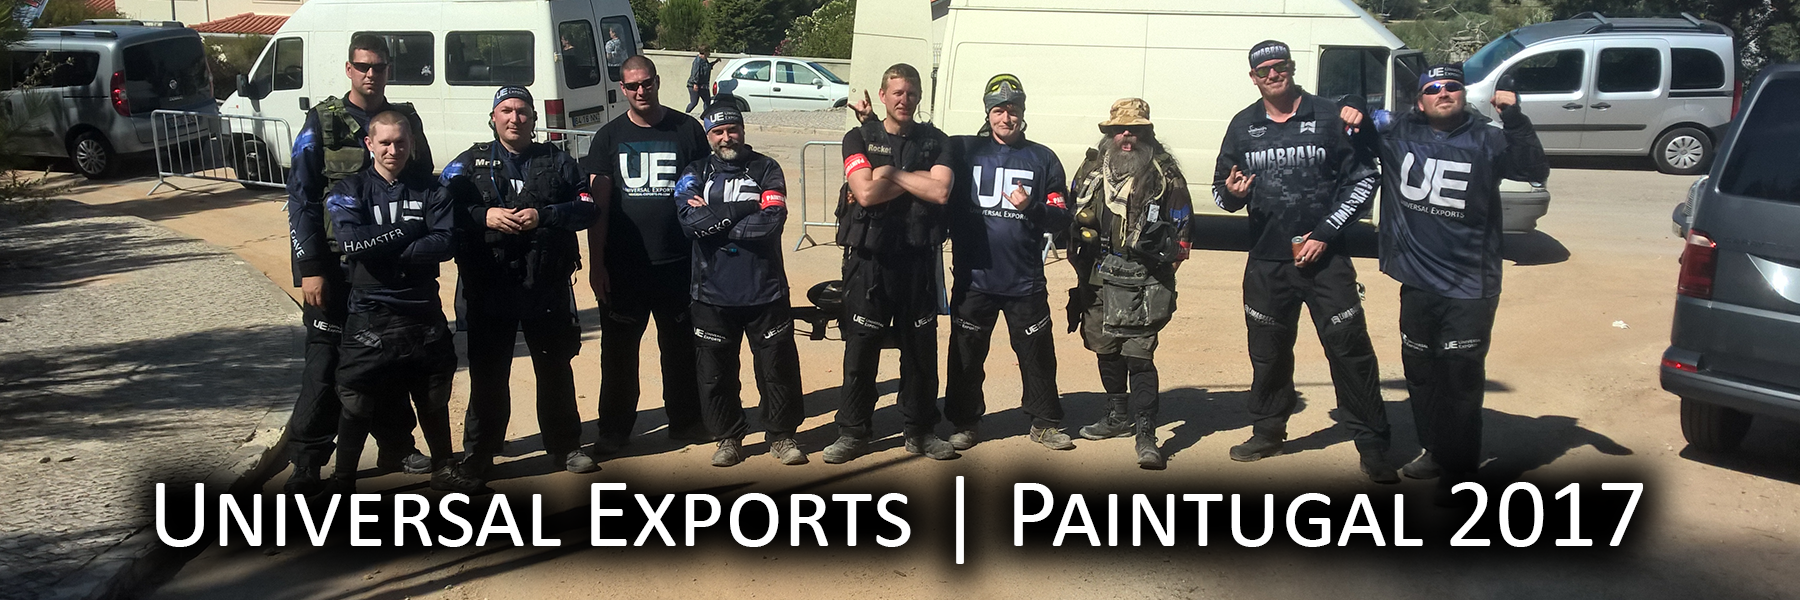 Universal Exports : Paintugal 2017